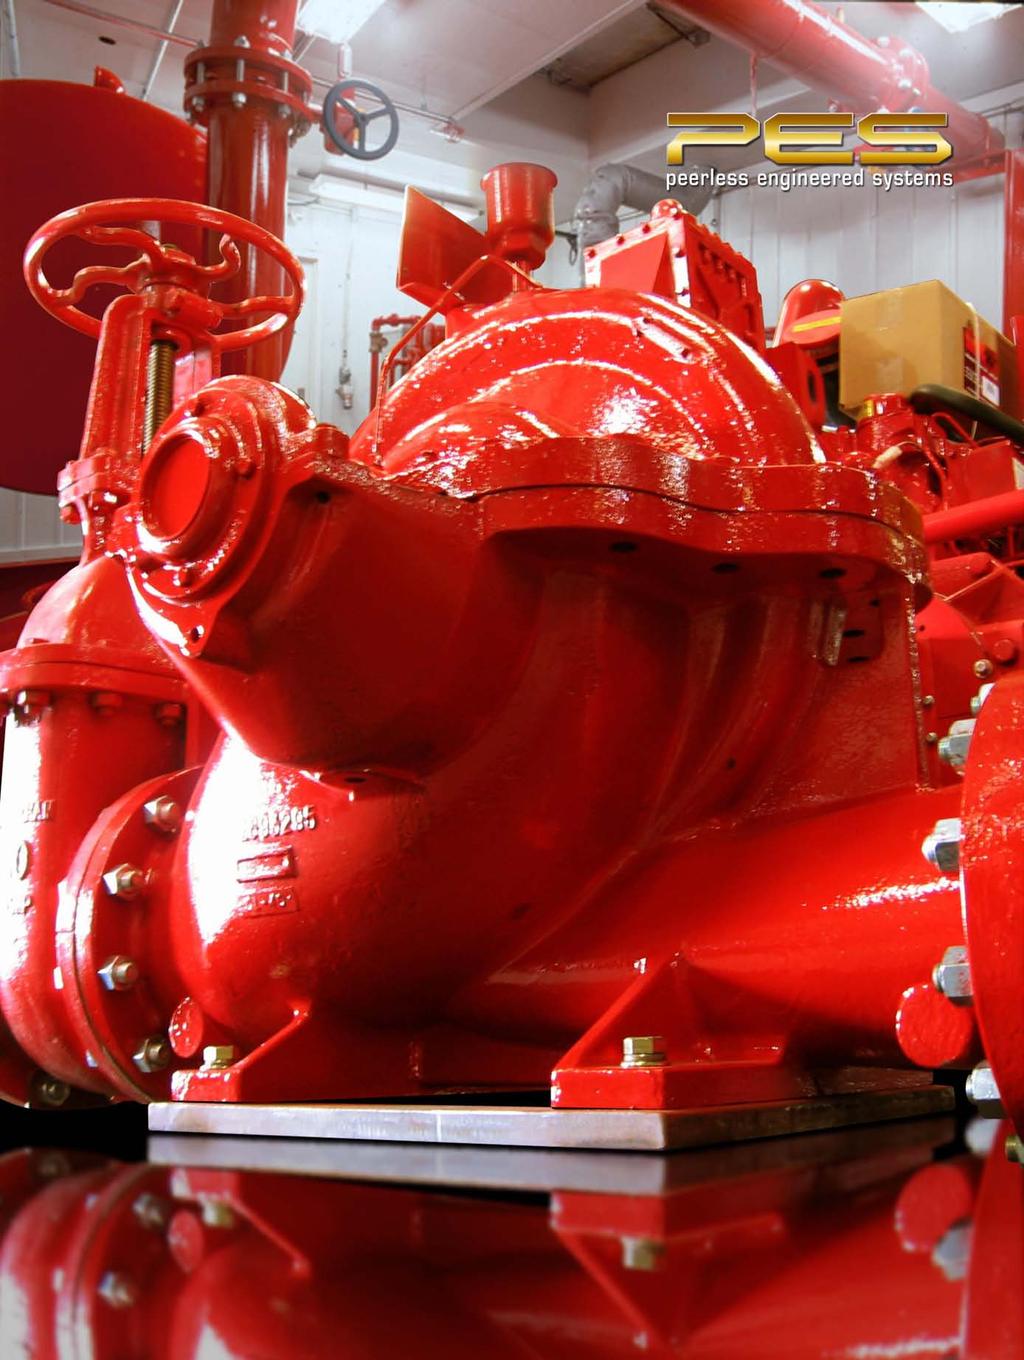 performance PEERLESS PUMP FIRE PROTECTION Thousands of Peerless Pump installations (UL, ULC or FM approved) deliver superior fire protection to facilities worldwide.